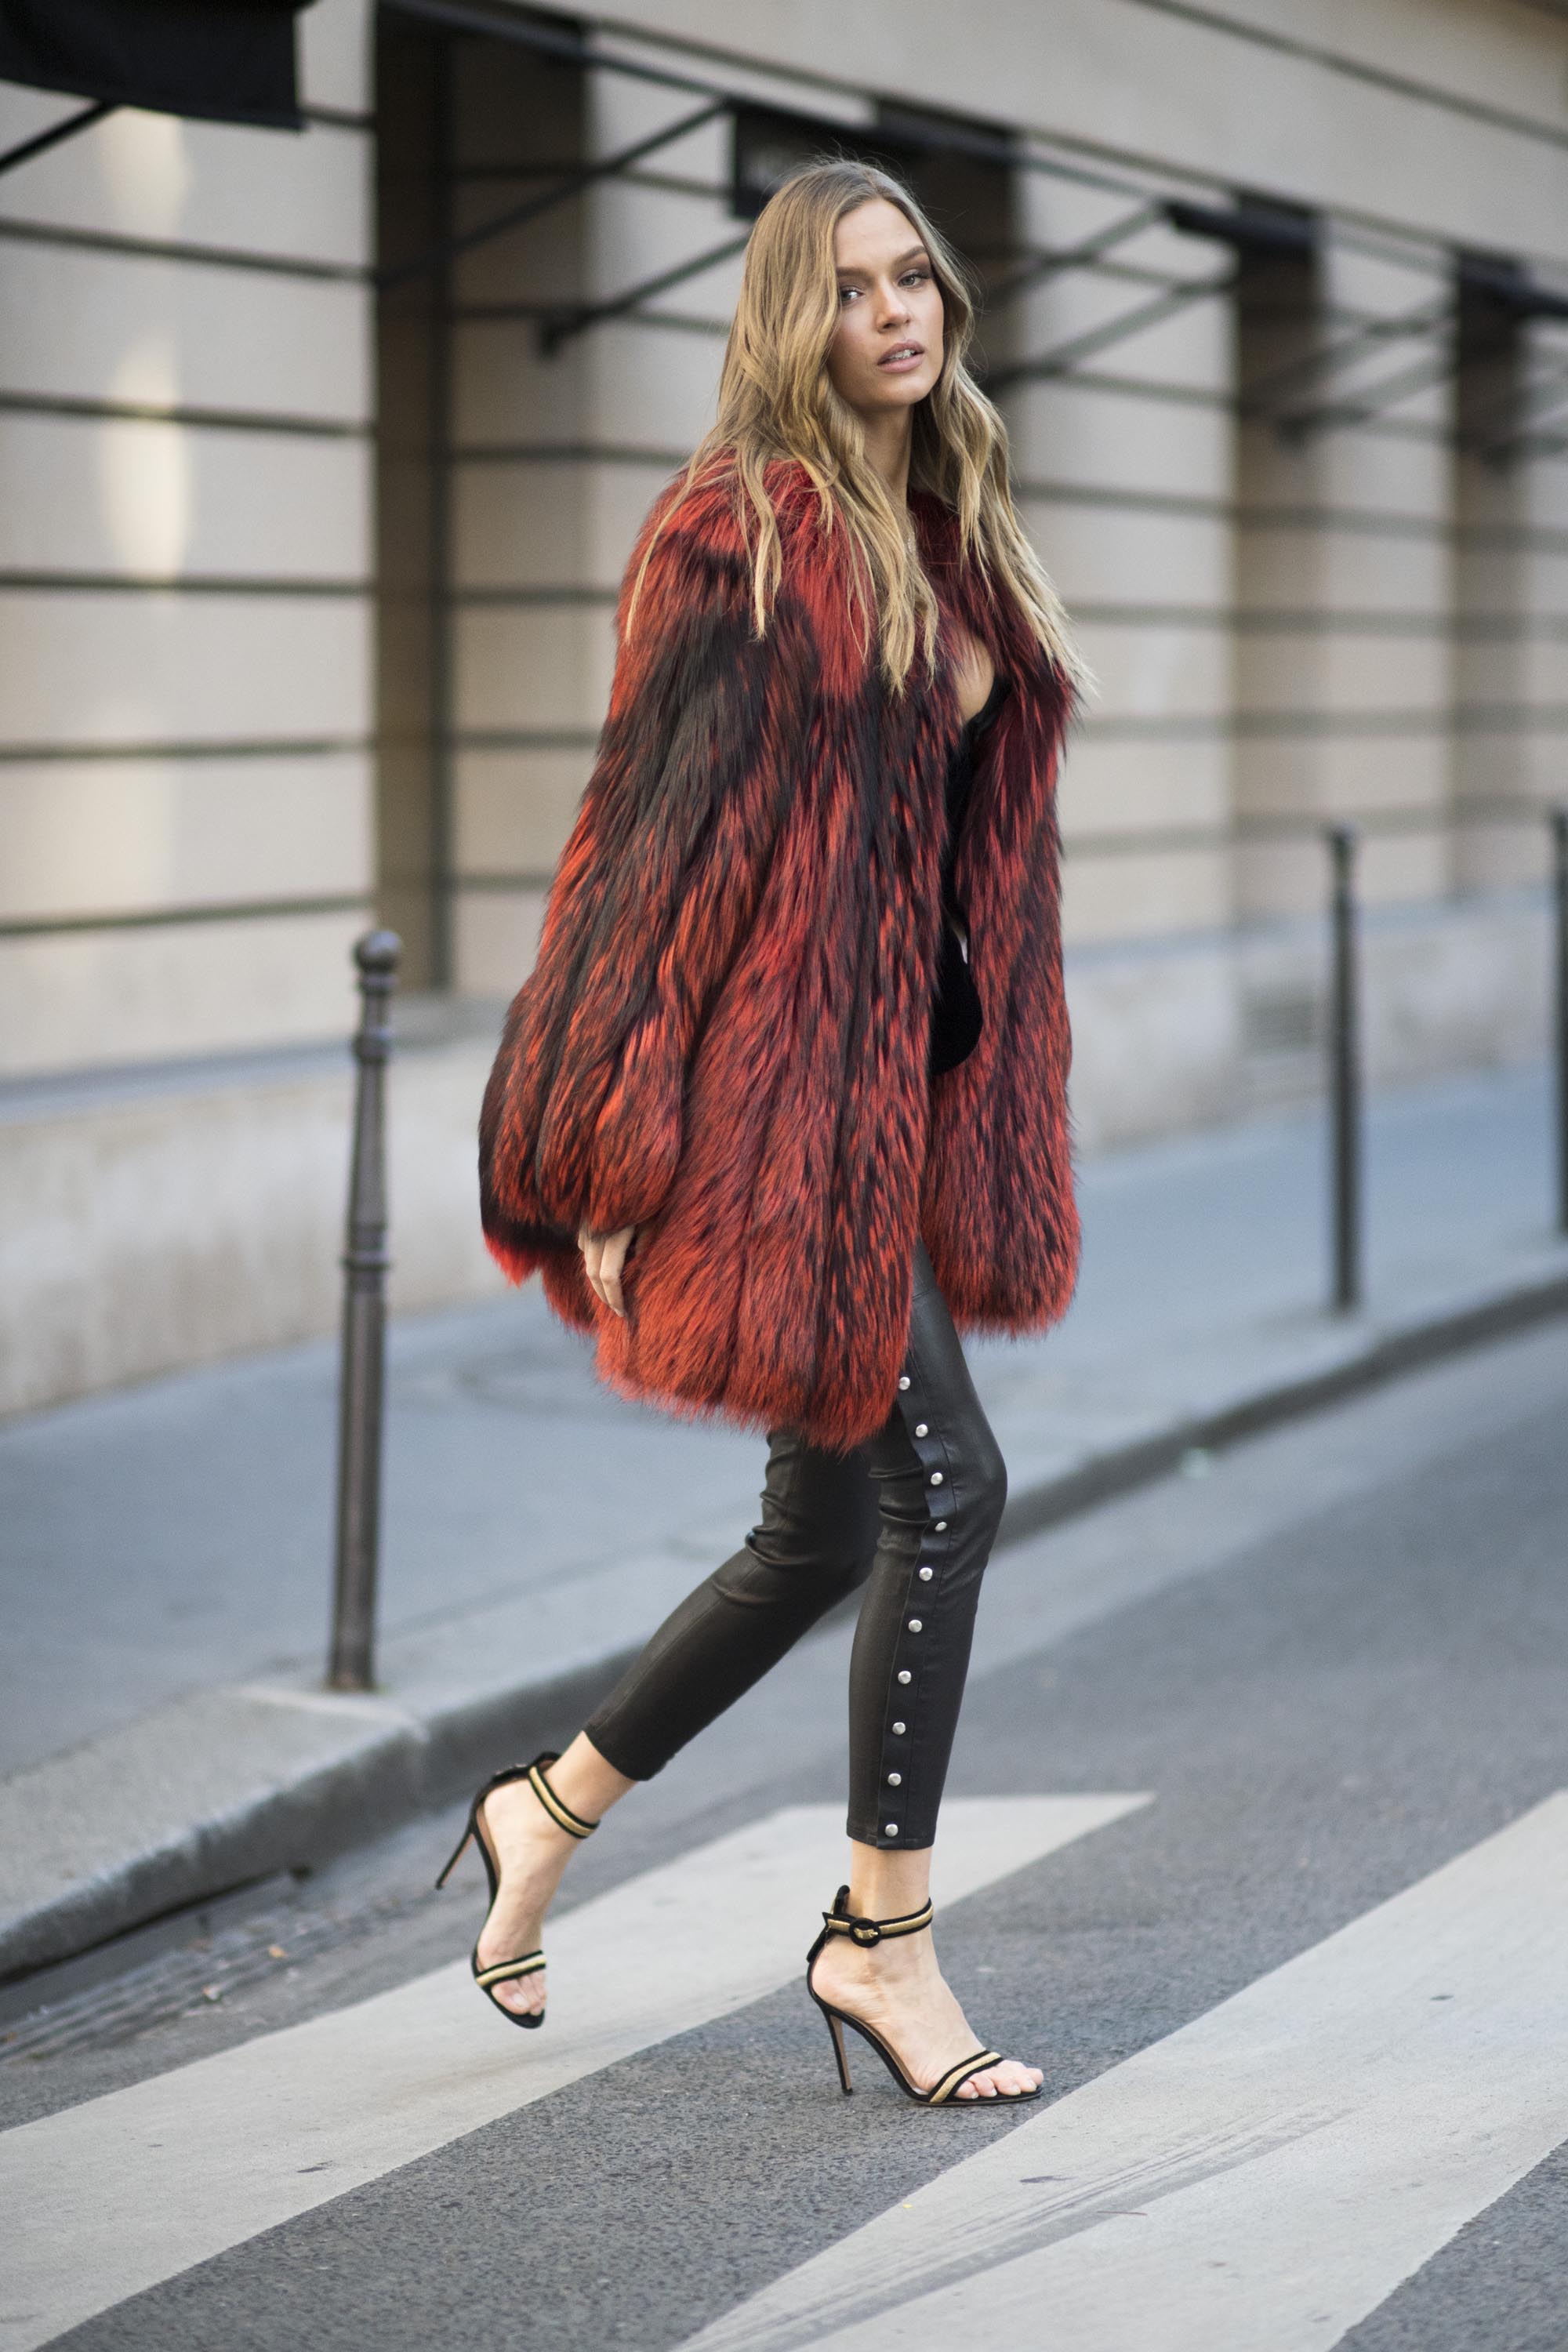 PARIS, FRANCE - NOVEMBER 29:  Josephine Skriver is seen wearing a fake fur coat before the Victorias Secret rehearsal in the streets of Paris on November 29, 2016 in Paris, France.  (Photo by Timur Emek/GC Images)